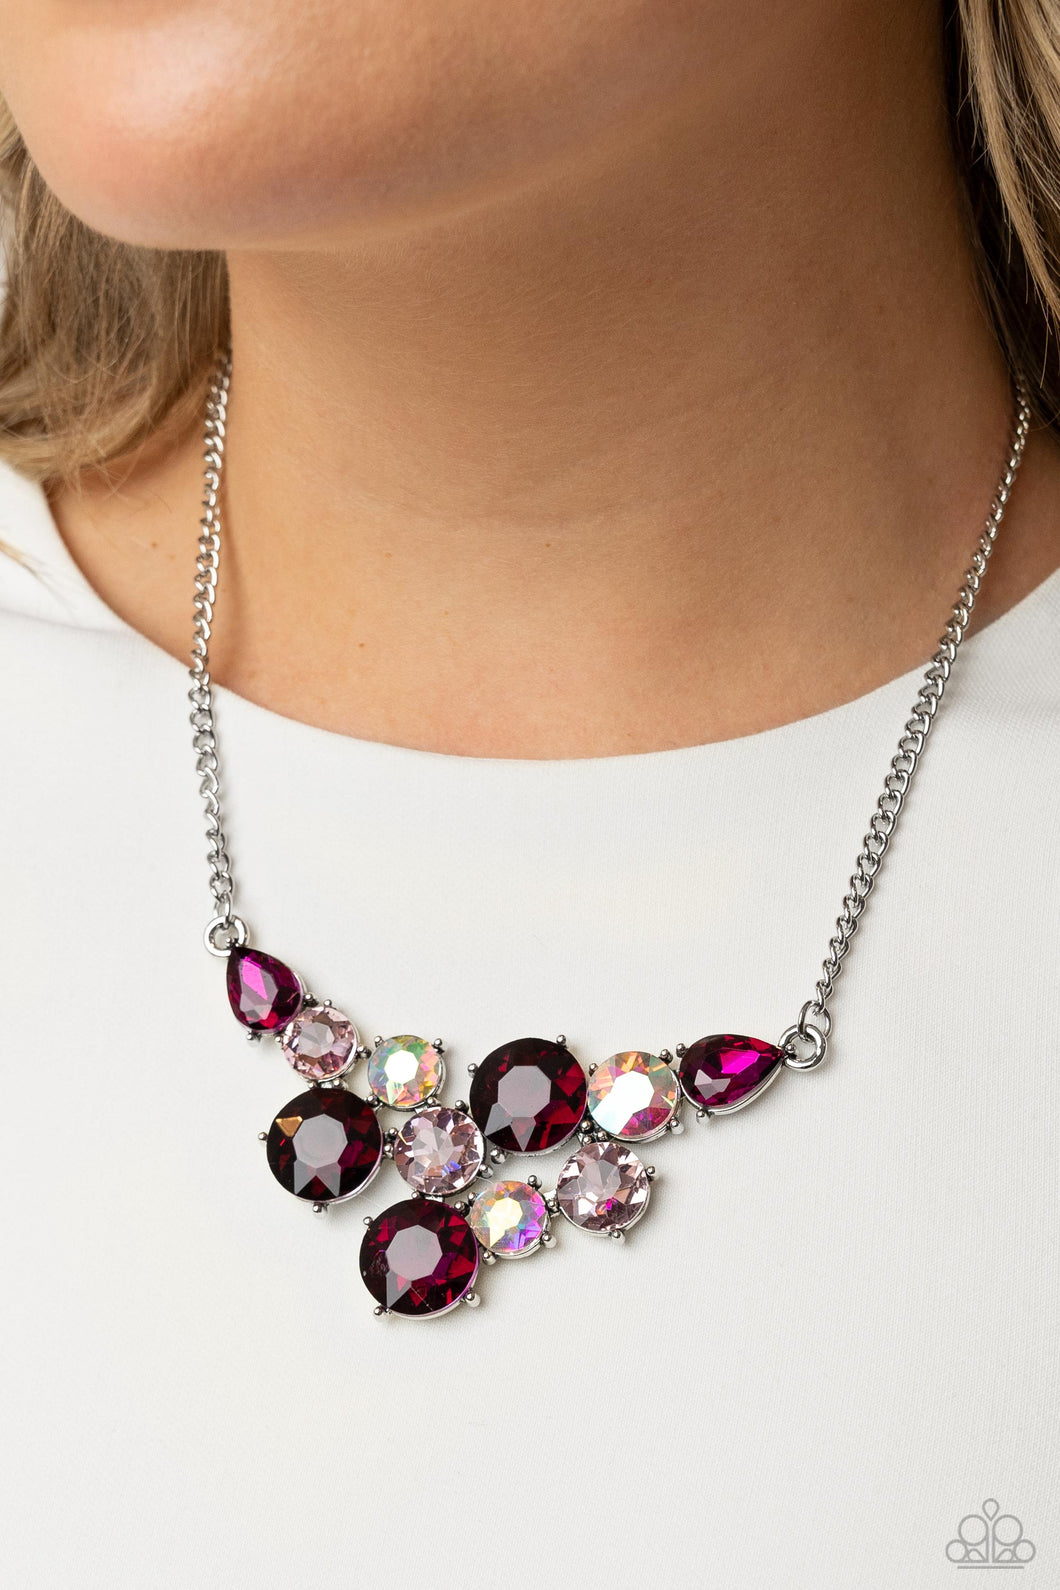 Paparazzi “Round Royalty” Pink Necklace Earring Set